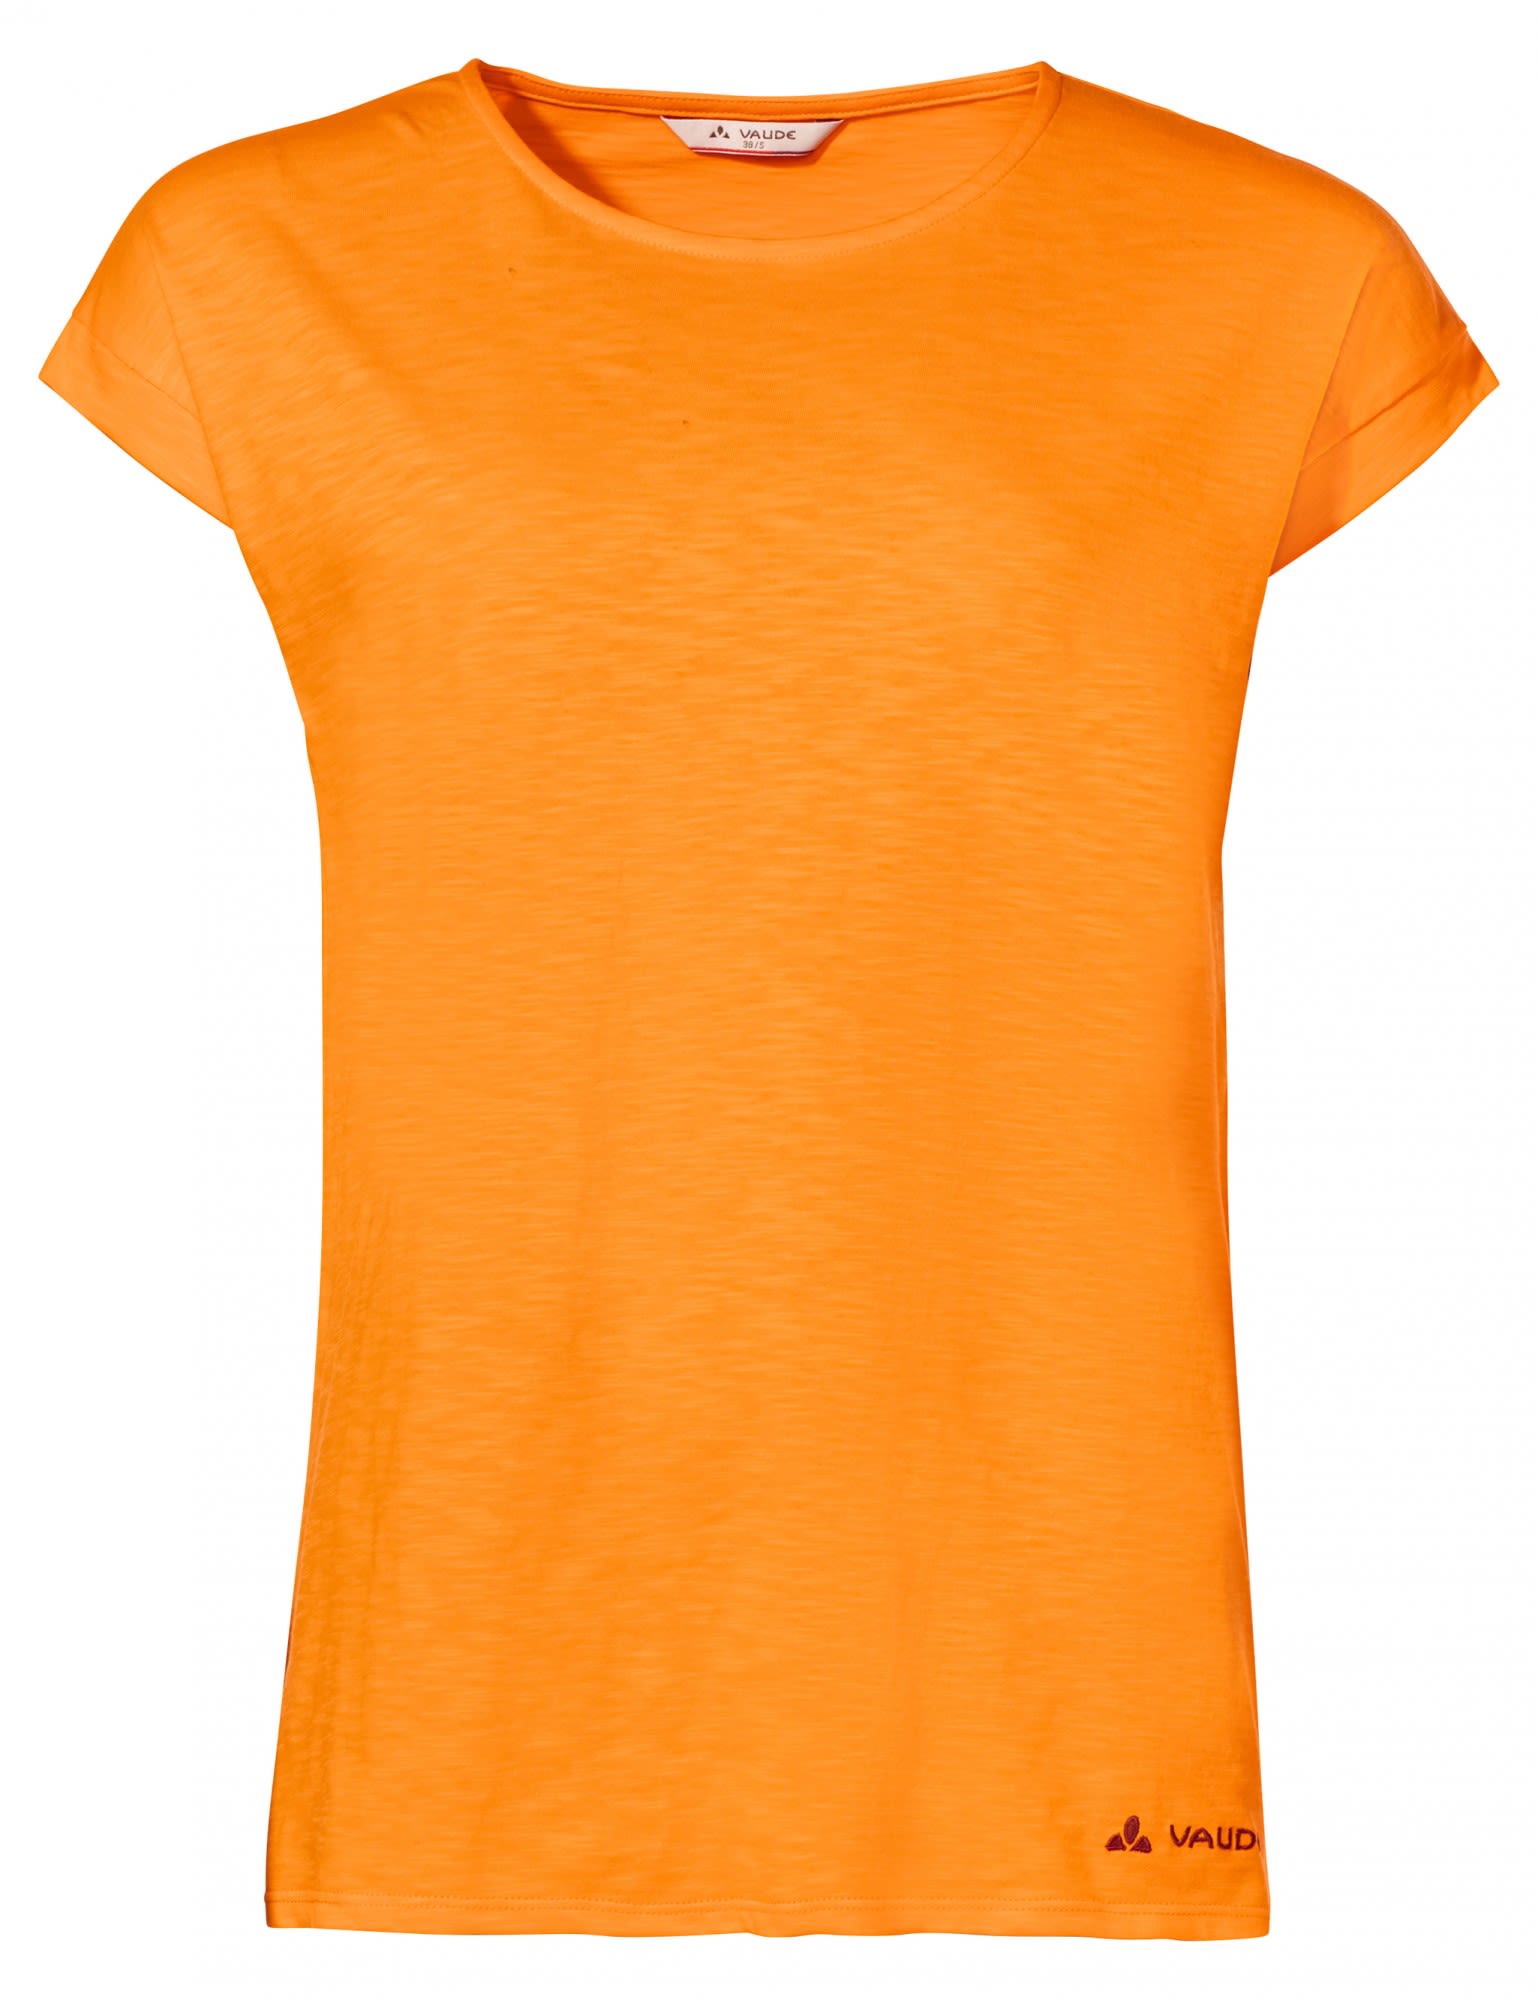 51% Vaude easy-care Sales at Womens cotton t-shirt. off Opening Coupons: organic comfortable